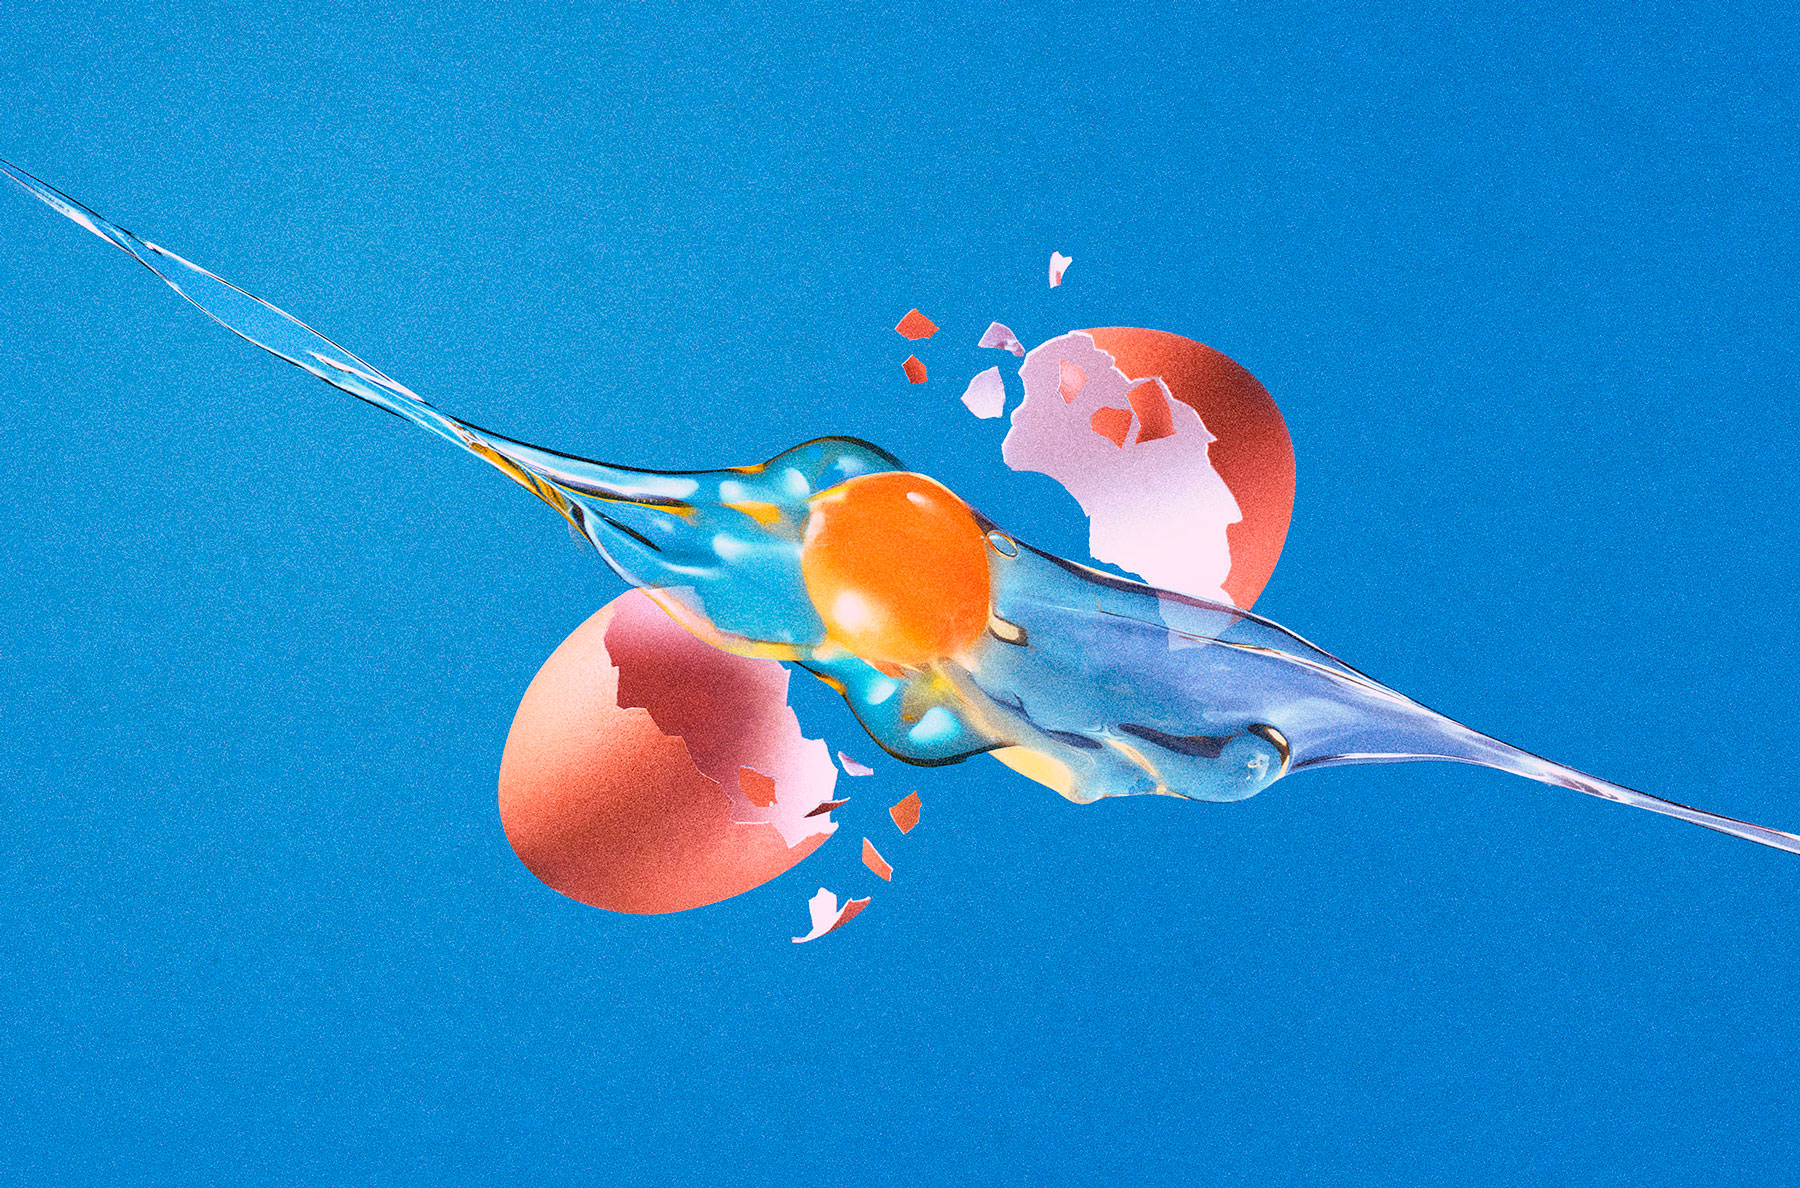 Egg Explosion - egg yolk flying through the air with shell shattering - London Food & Drinks Photographer